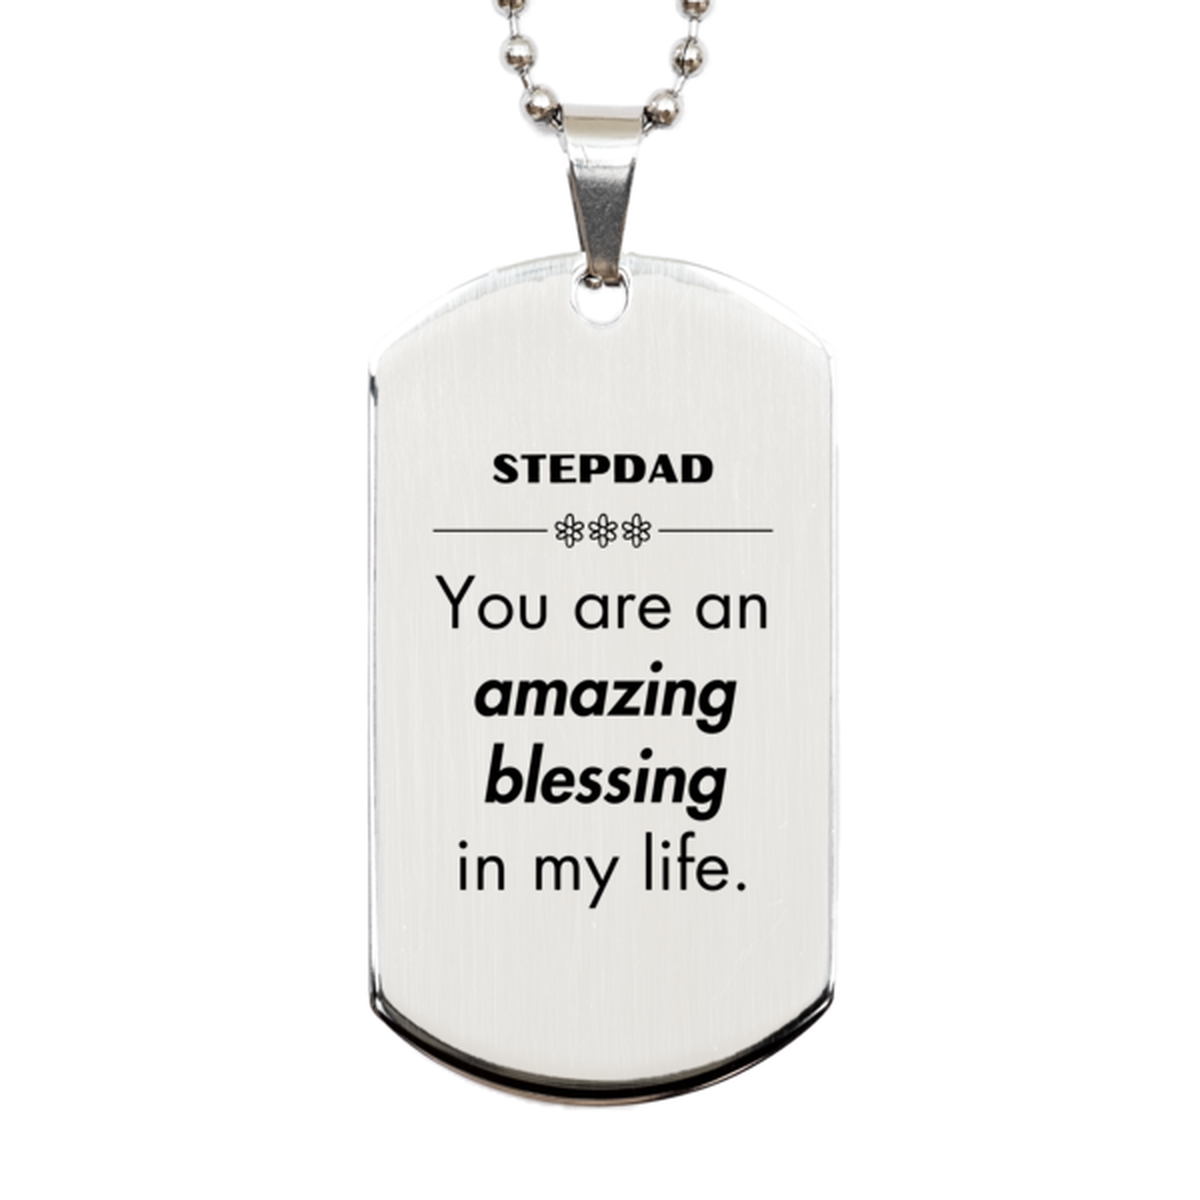 Stepdad Silver Dog Tag, You are an amazing blessing in my life, Thank You Gifts For Stepdad, Inspirational Birthday Christmas Unique Gifts For Stepdad